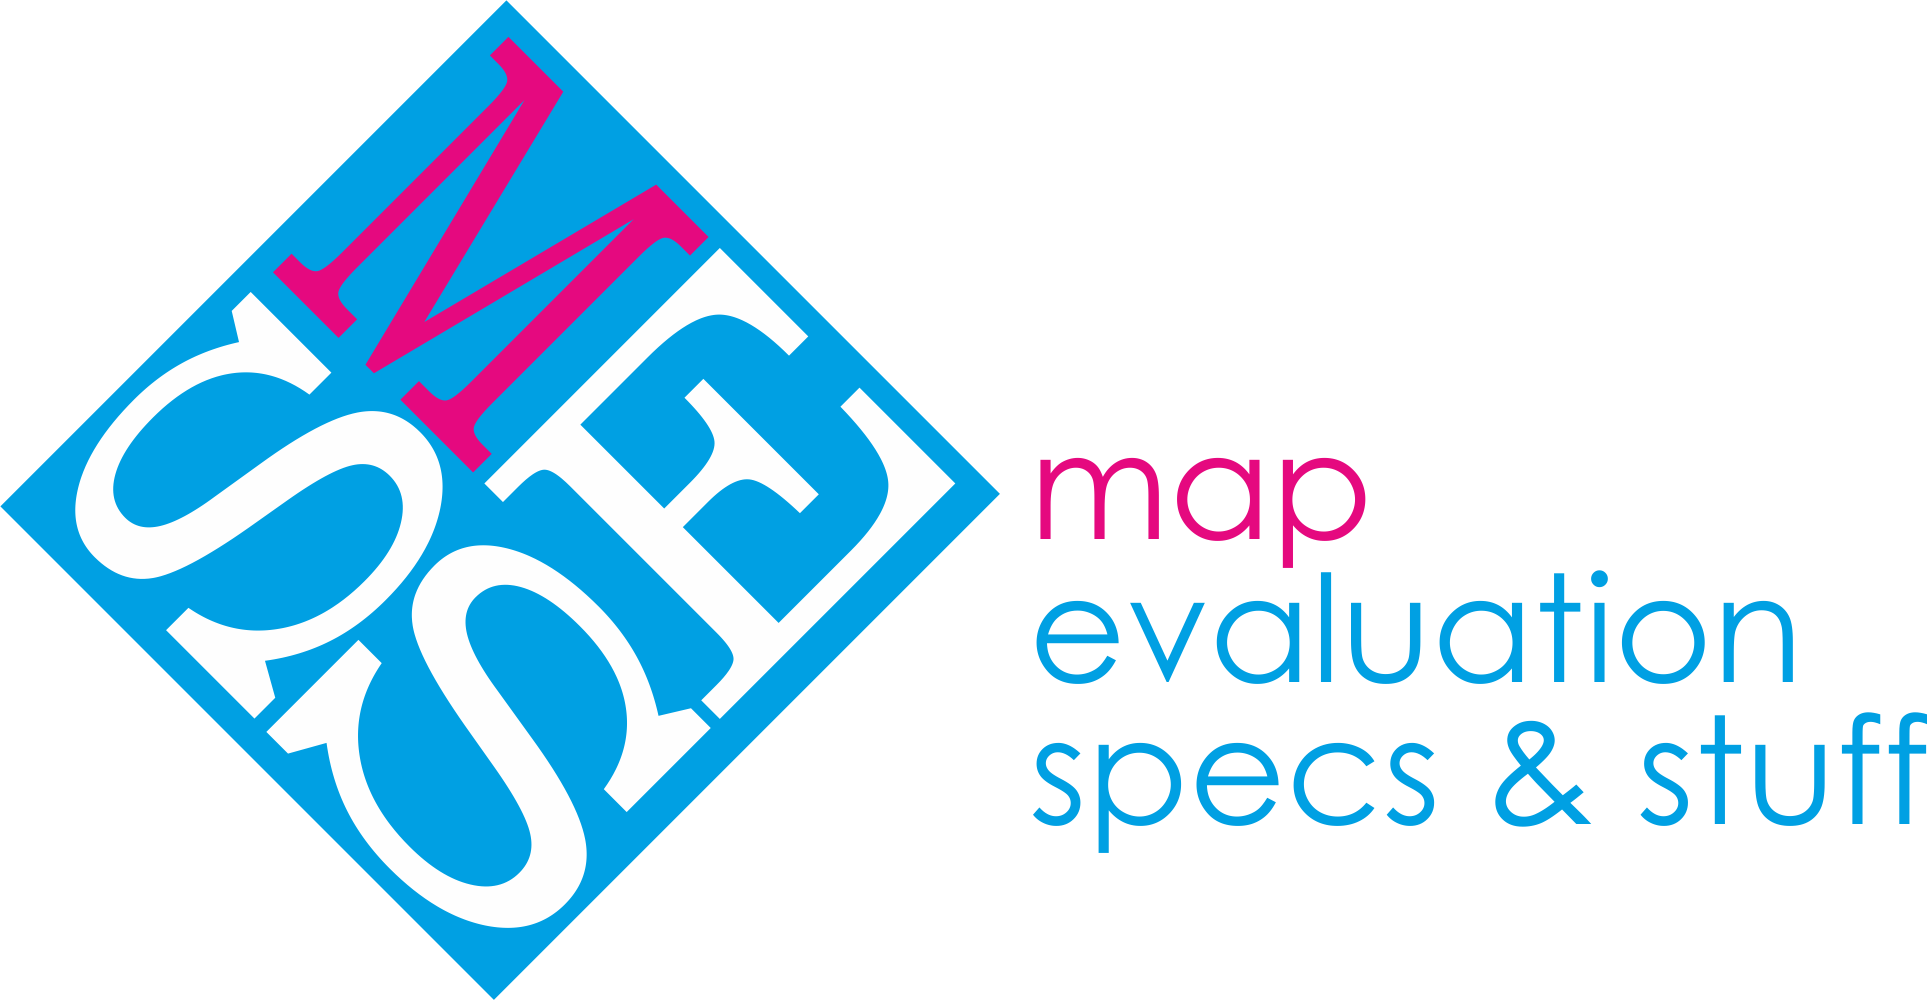 Mess: Your favourite tool for Maps, Evaluation, Specs and Stuff